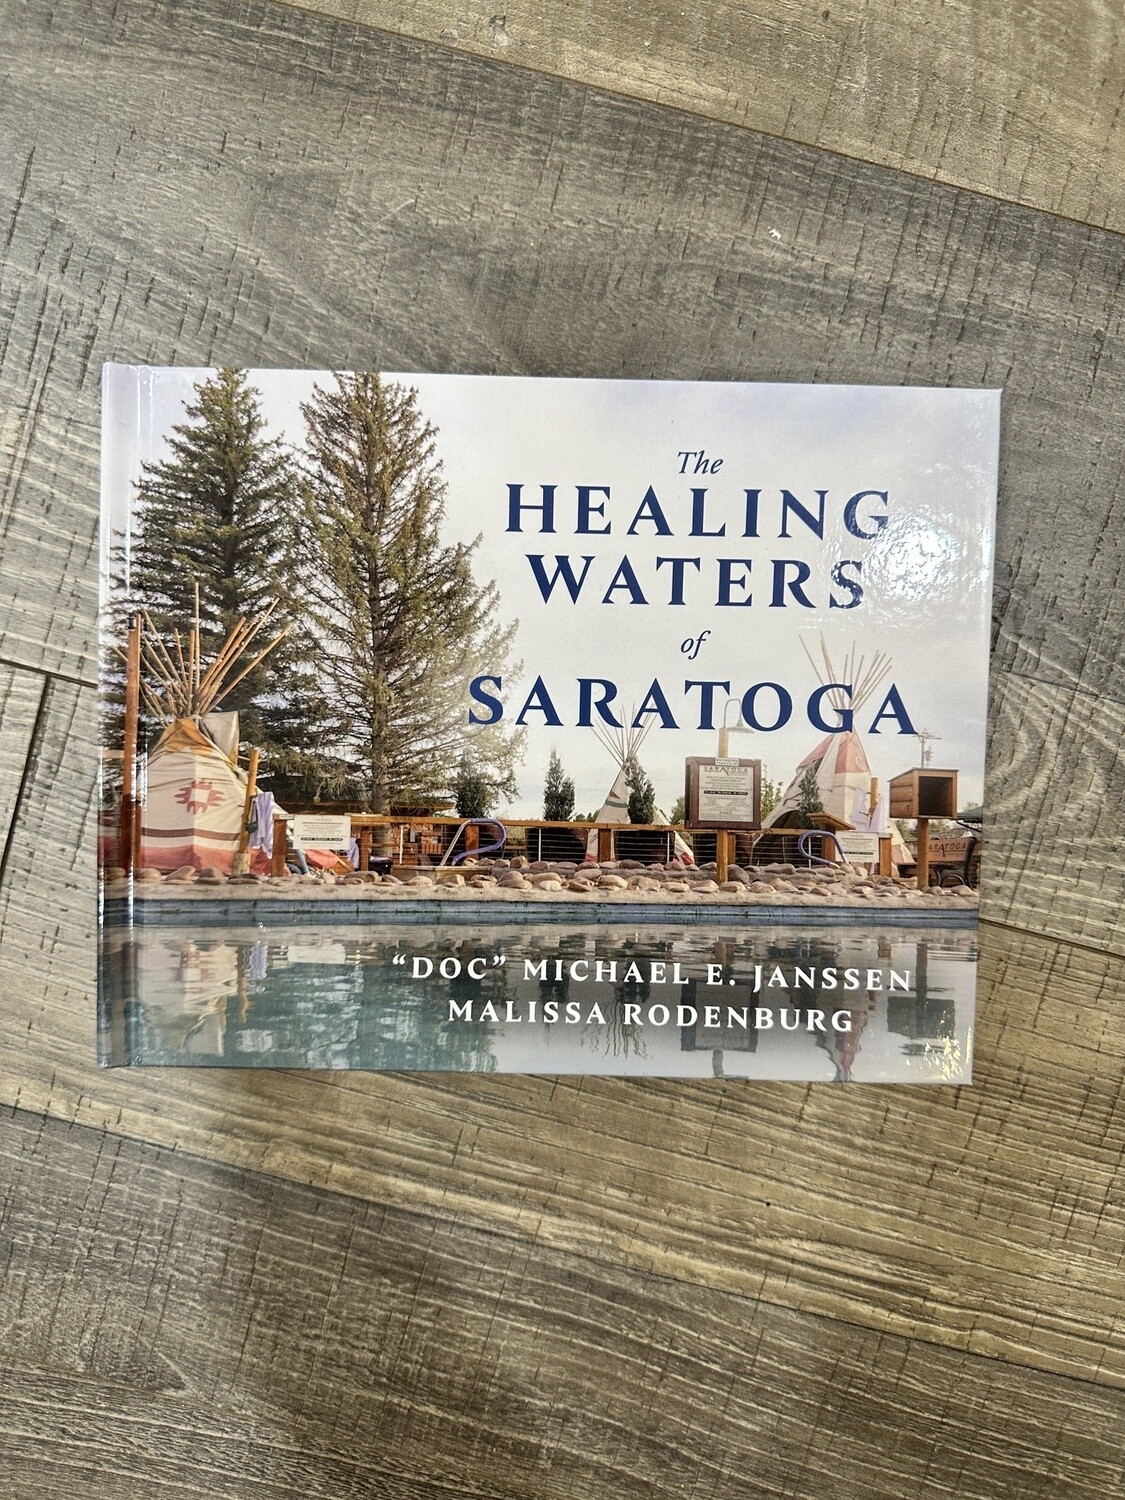 Janssen, Michael E-The Healing Waters of Saratoga, Book Type: Book Only